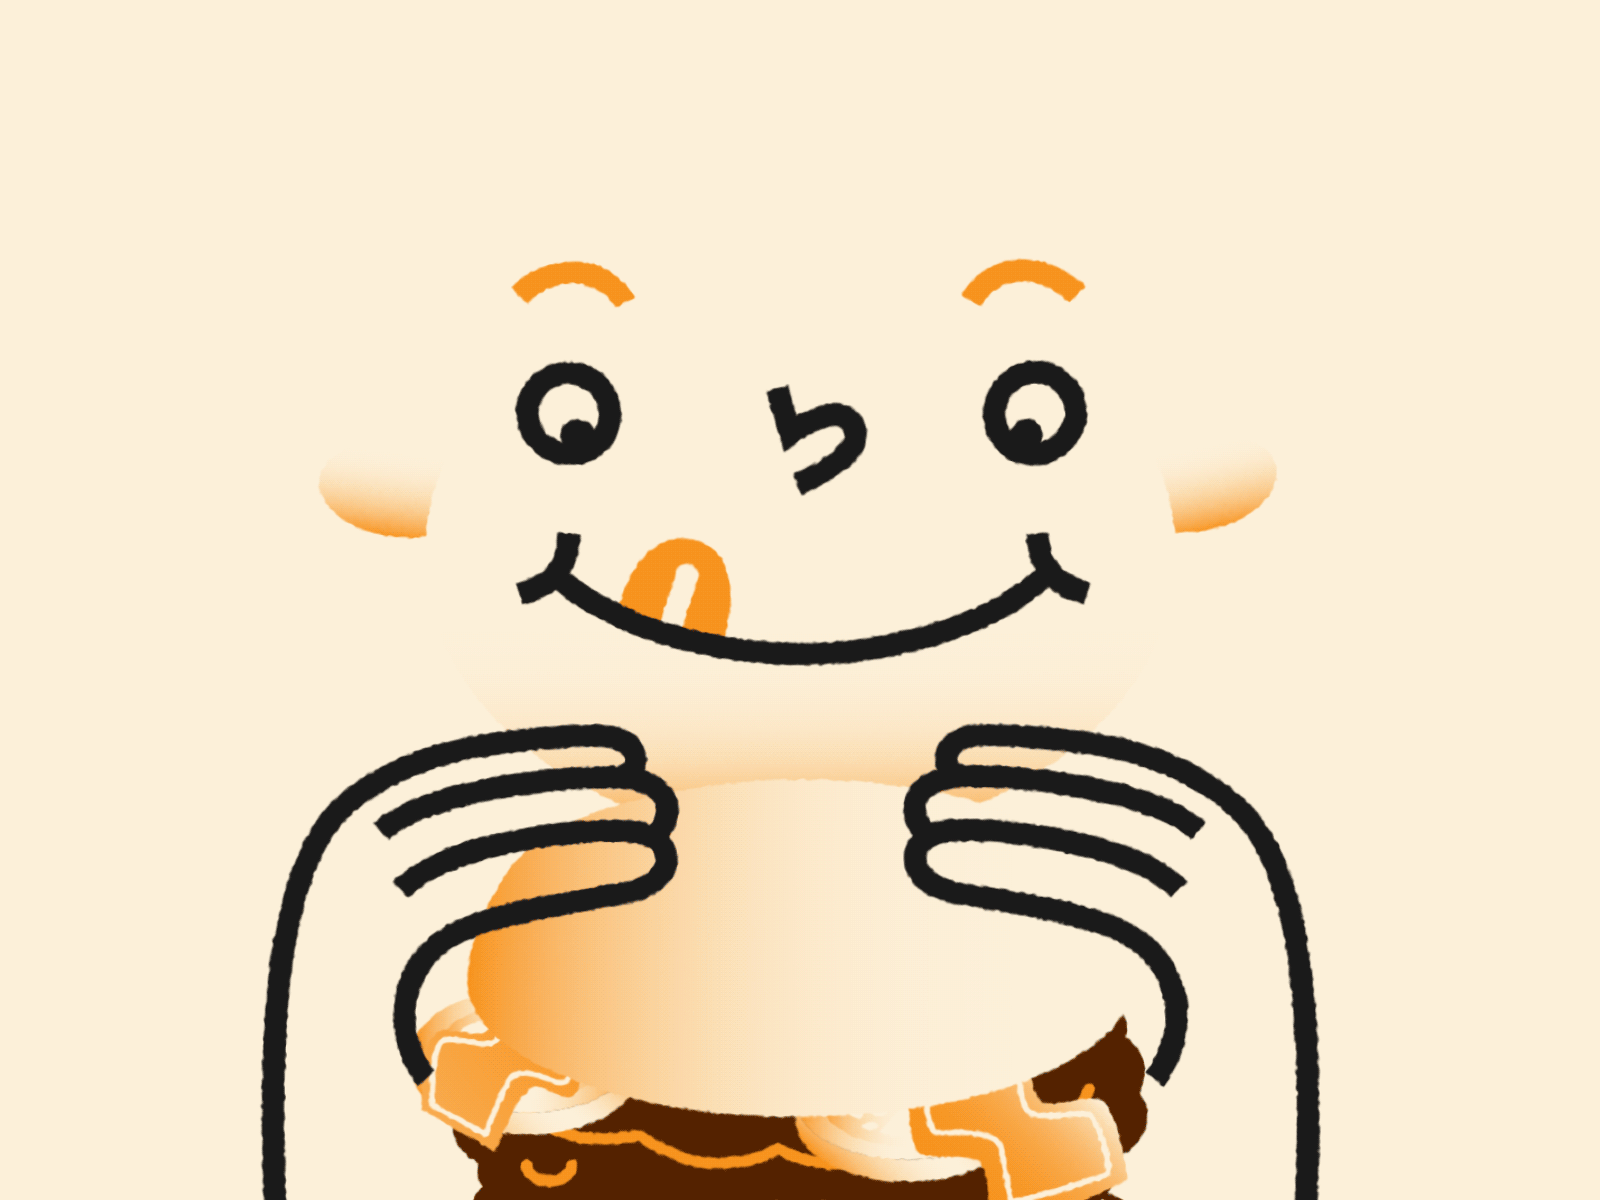 Tasty! 2d after affects animated gif animation burger character fun illustration tasty texture tongue